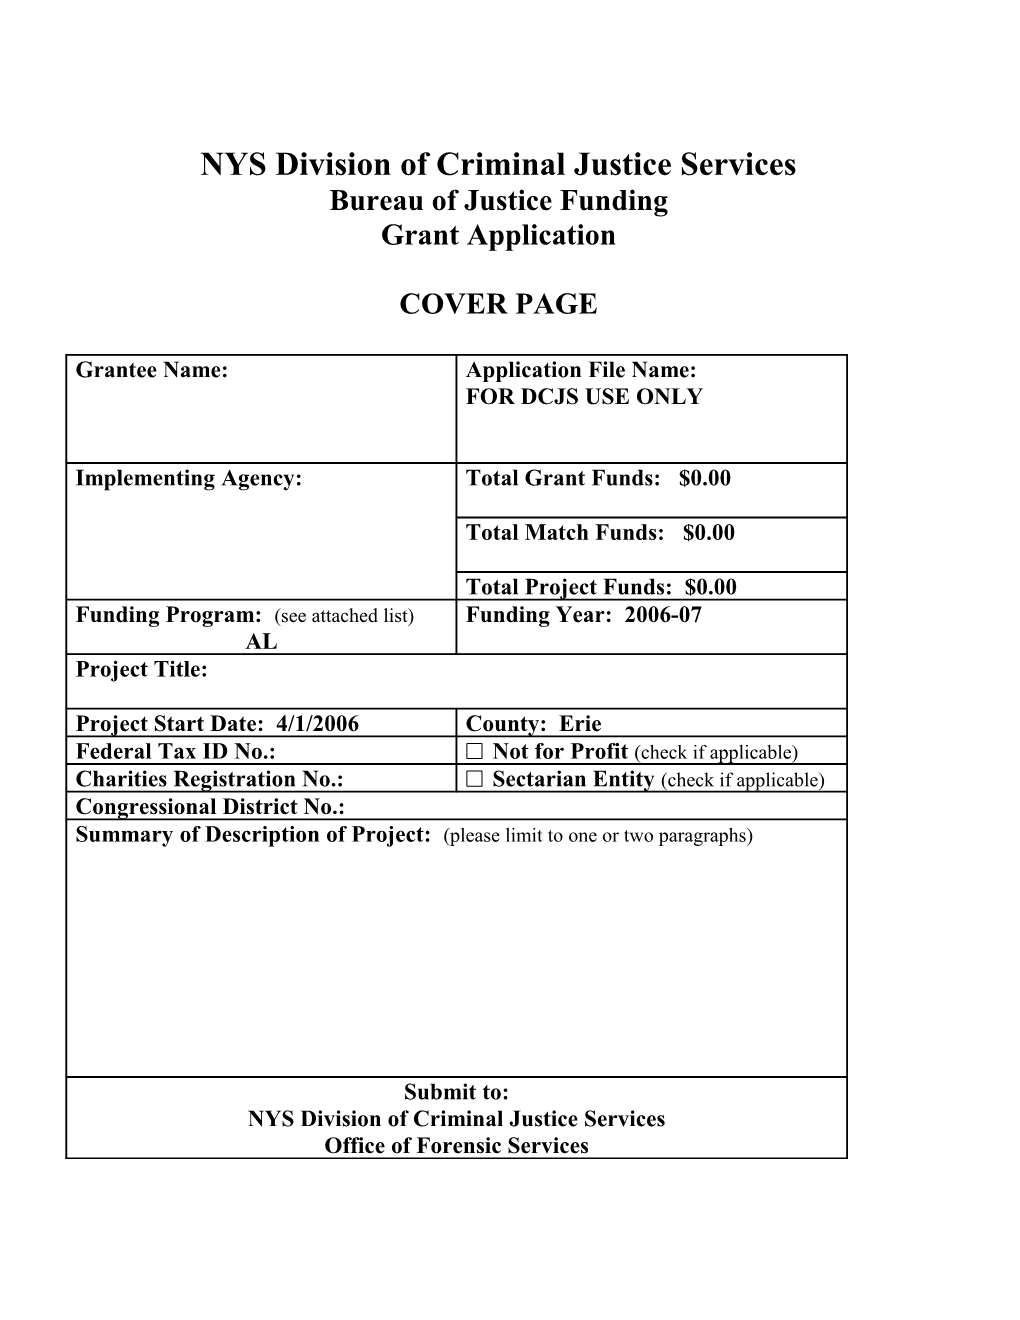 NYS Division of Criminal Justice Services